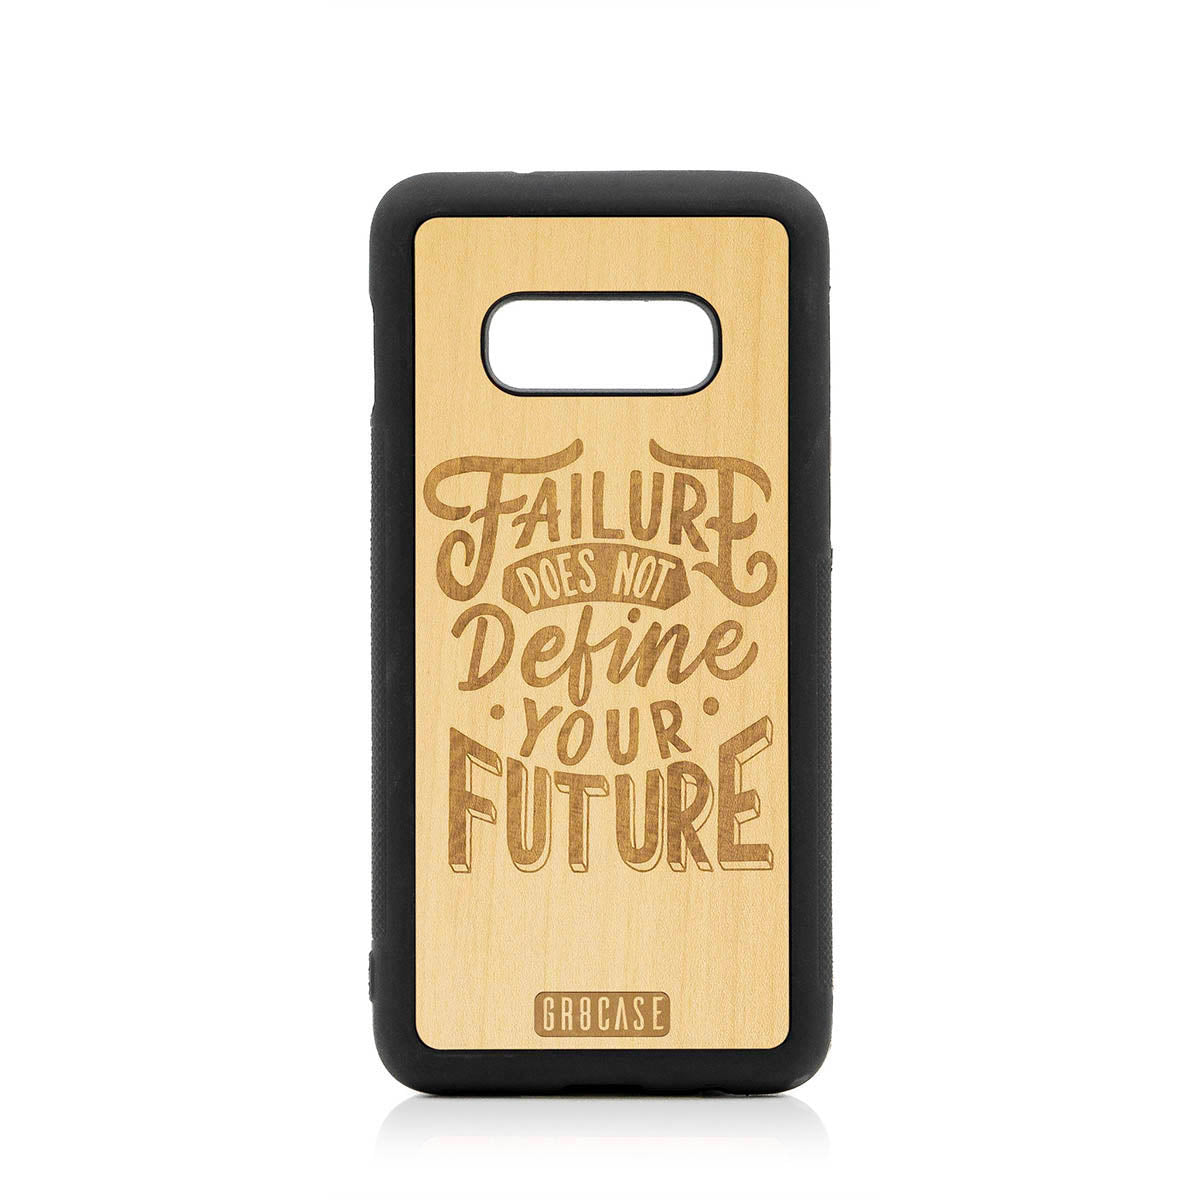 Failure Does Not Define You Future Design Wood Case For Samsung Galaxy S10E by GR8CASE